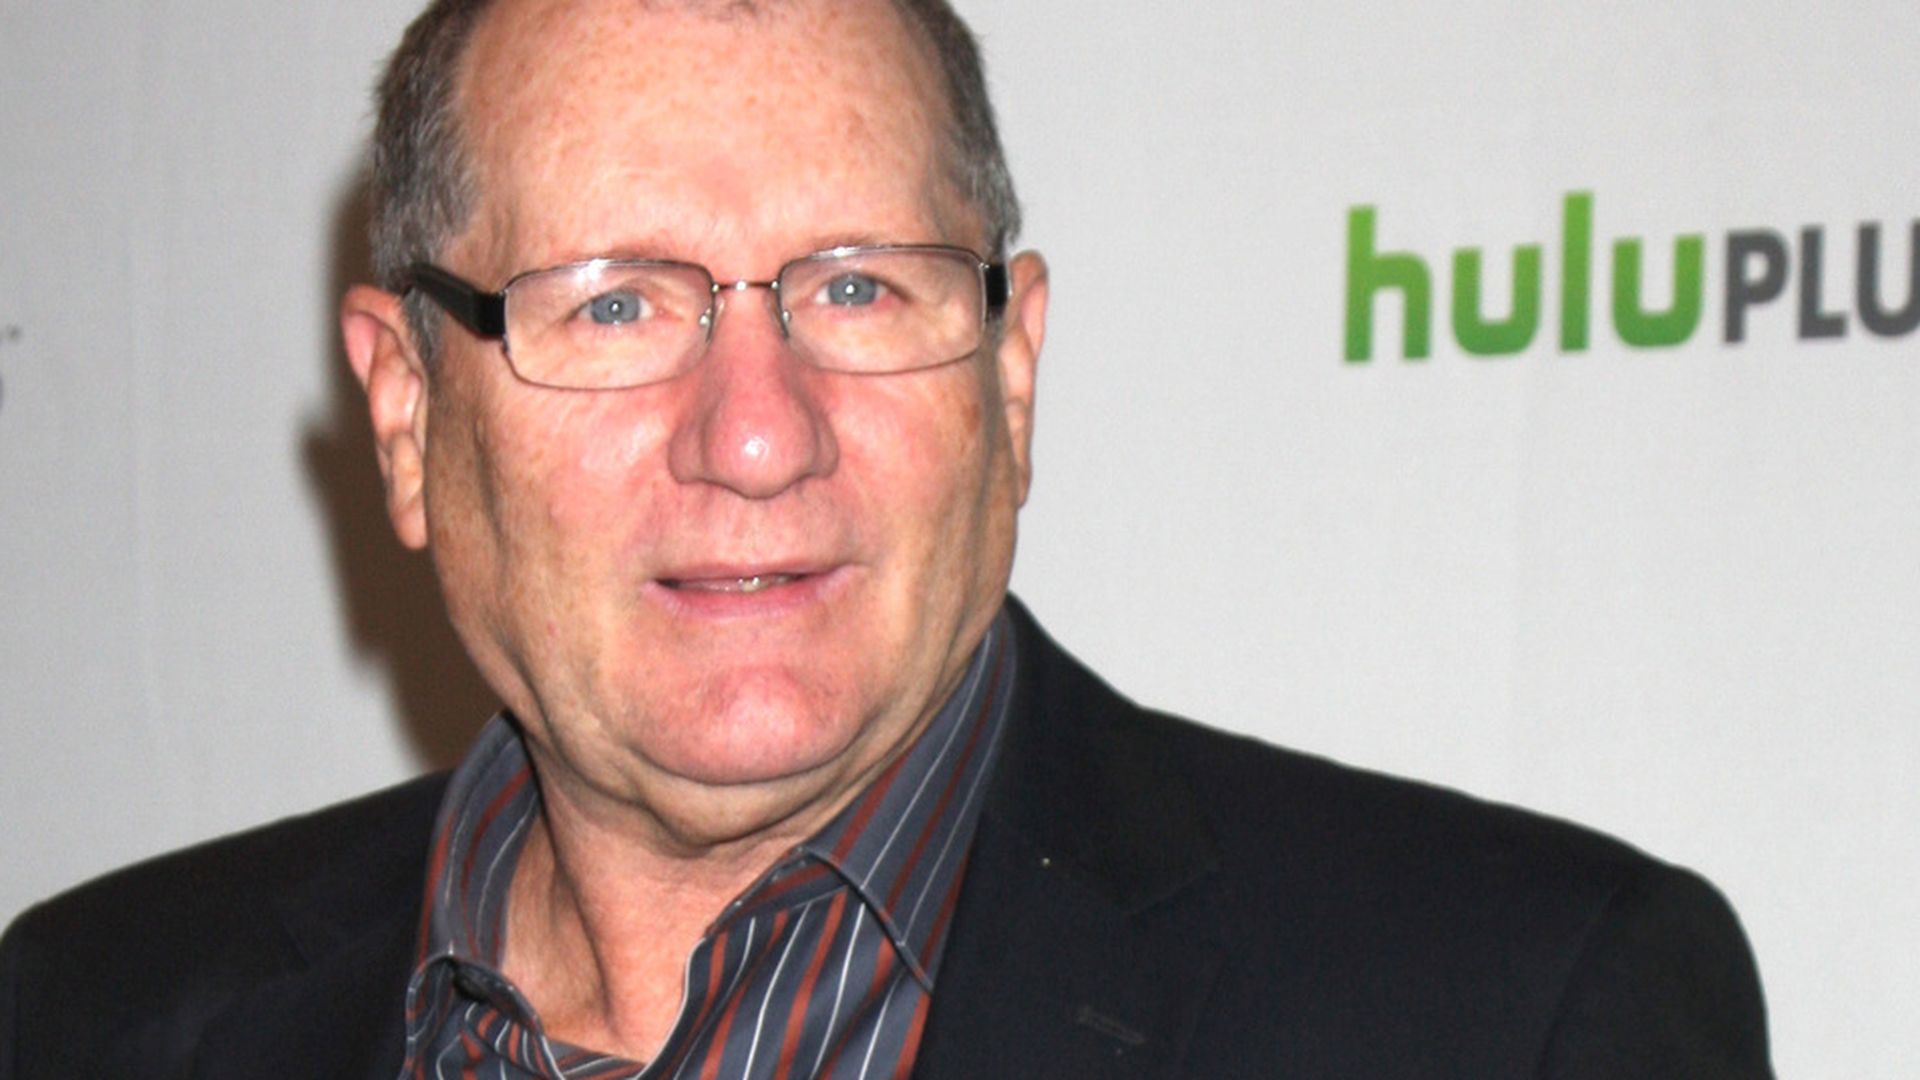 More Pictures Of Ed O'Neill. ed o neill news. 